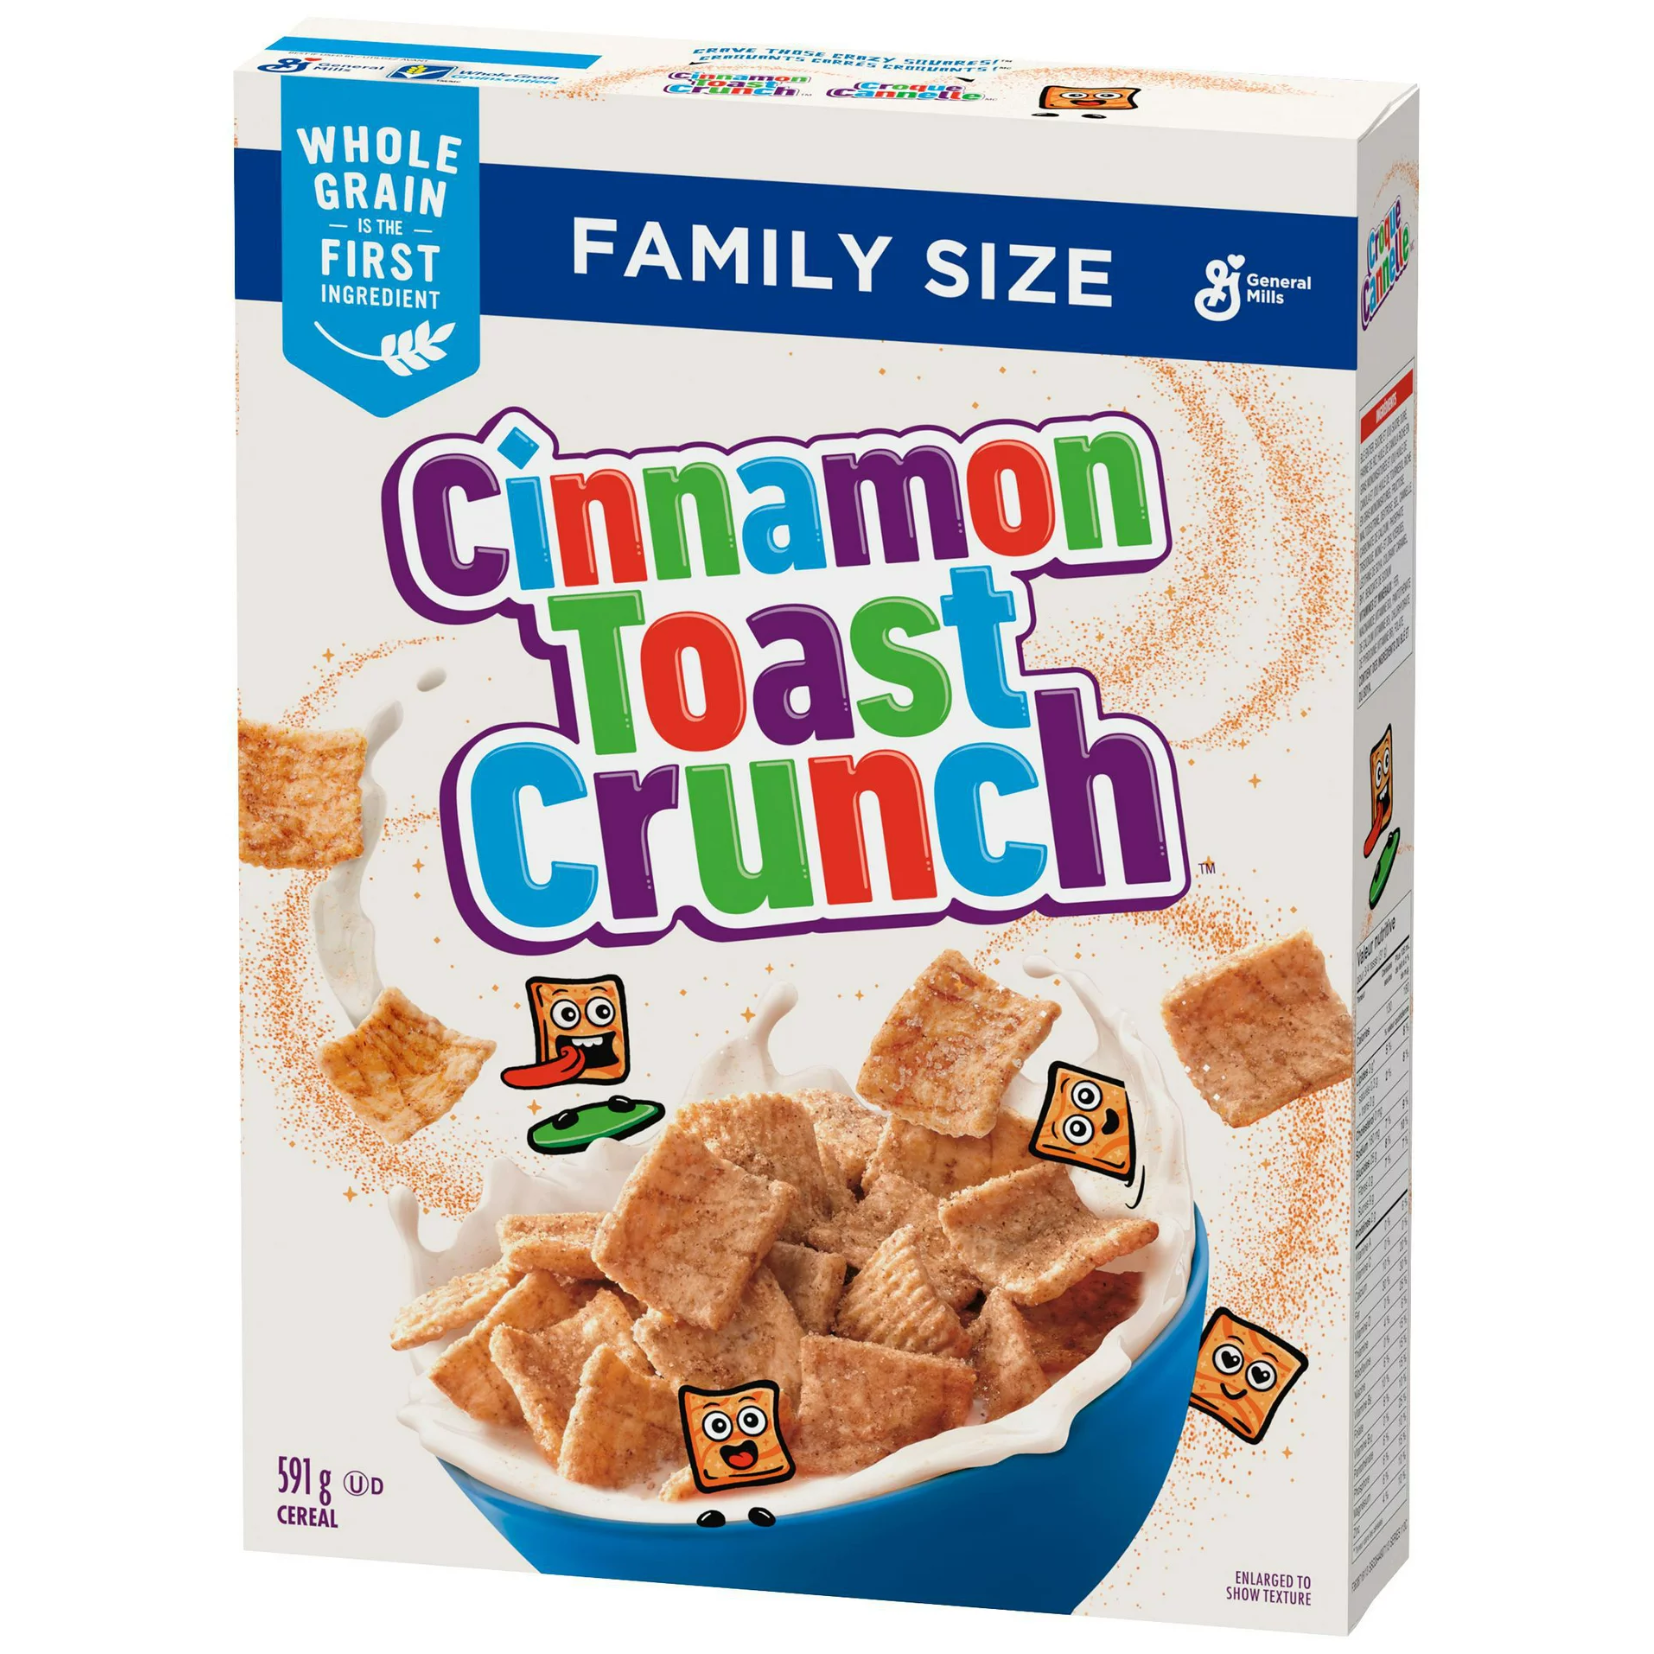 General Mills Cinnamon Toast Crunch Family Size Cereal 591g